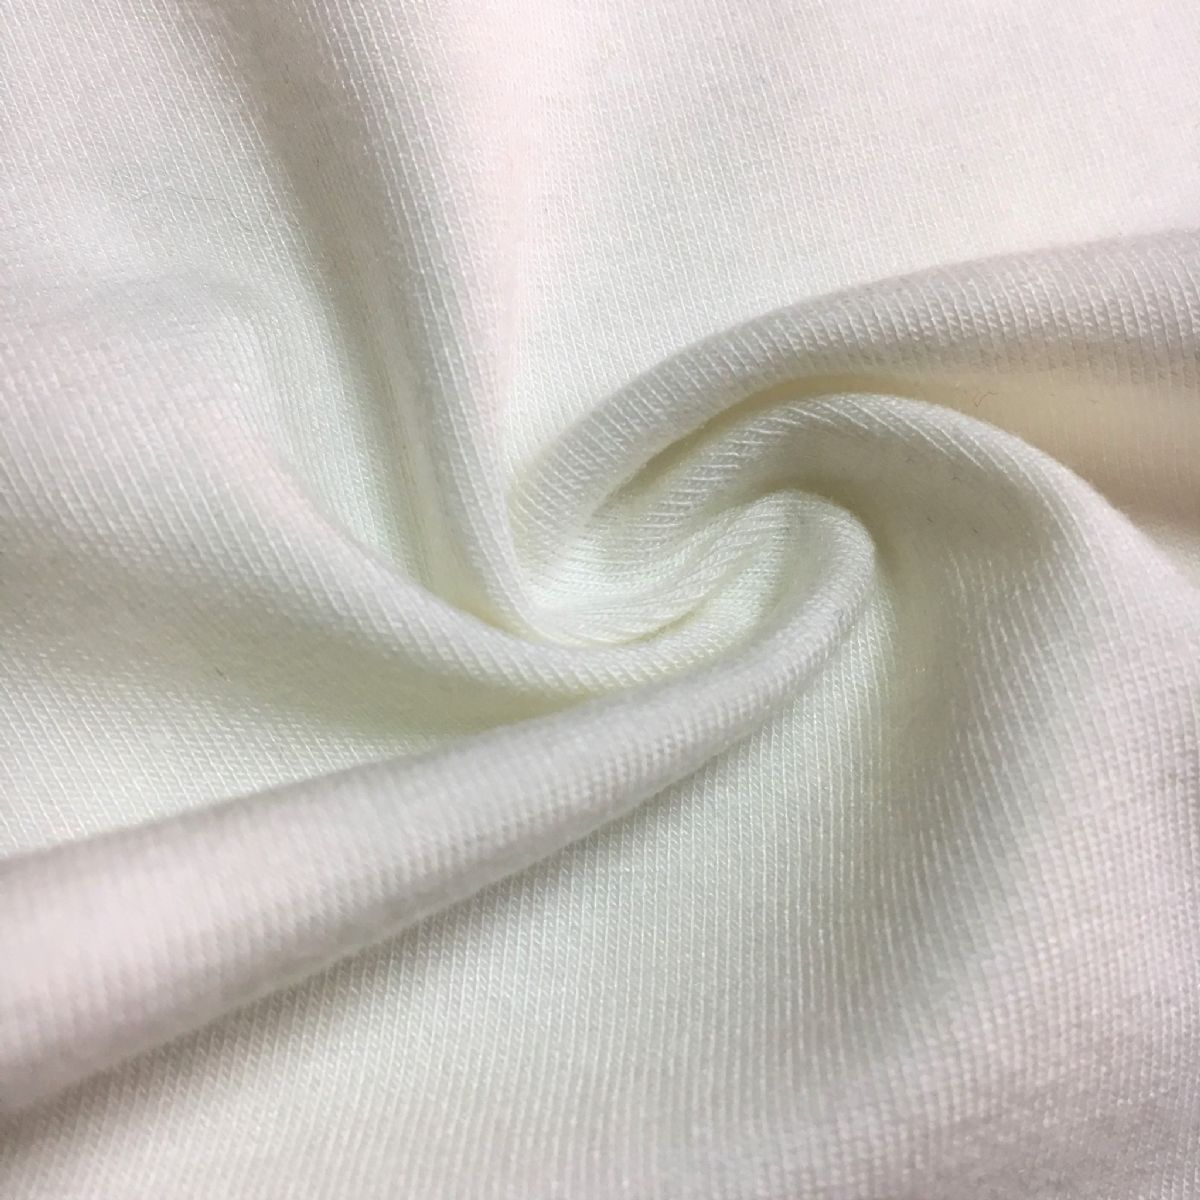 NC-1051 Super soft Modal spandex fabric  fabric  manufacturer，quality，taiwan textiles，functional fabric，Nylon，wicking  textiles，clothtex